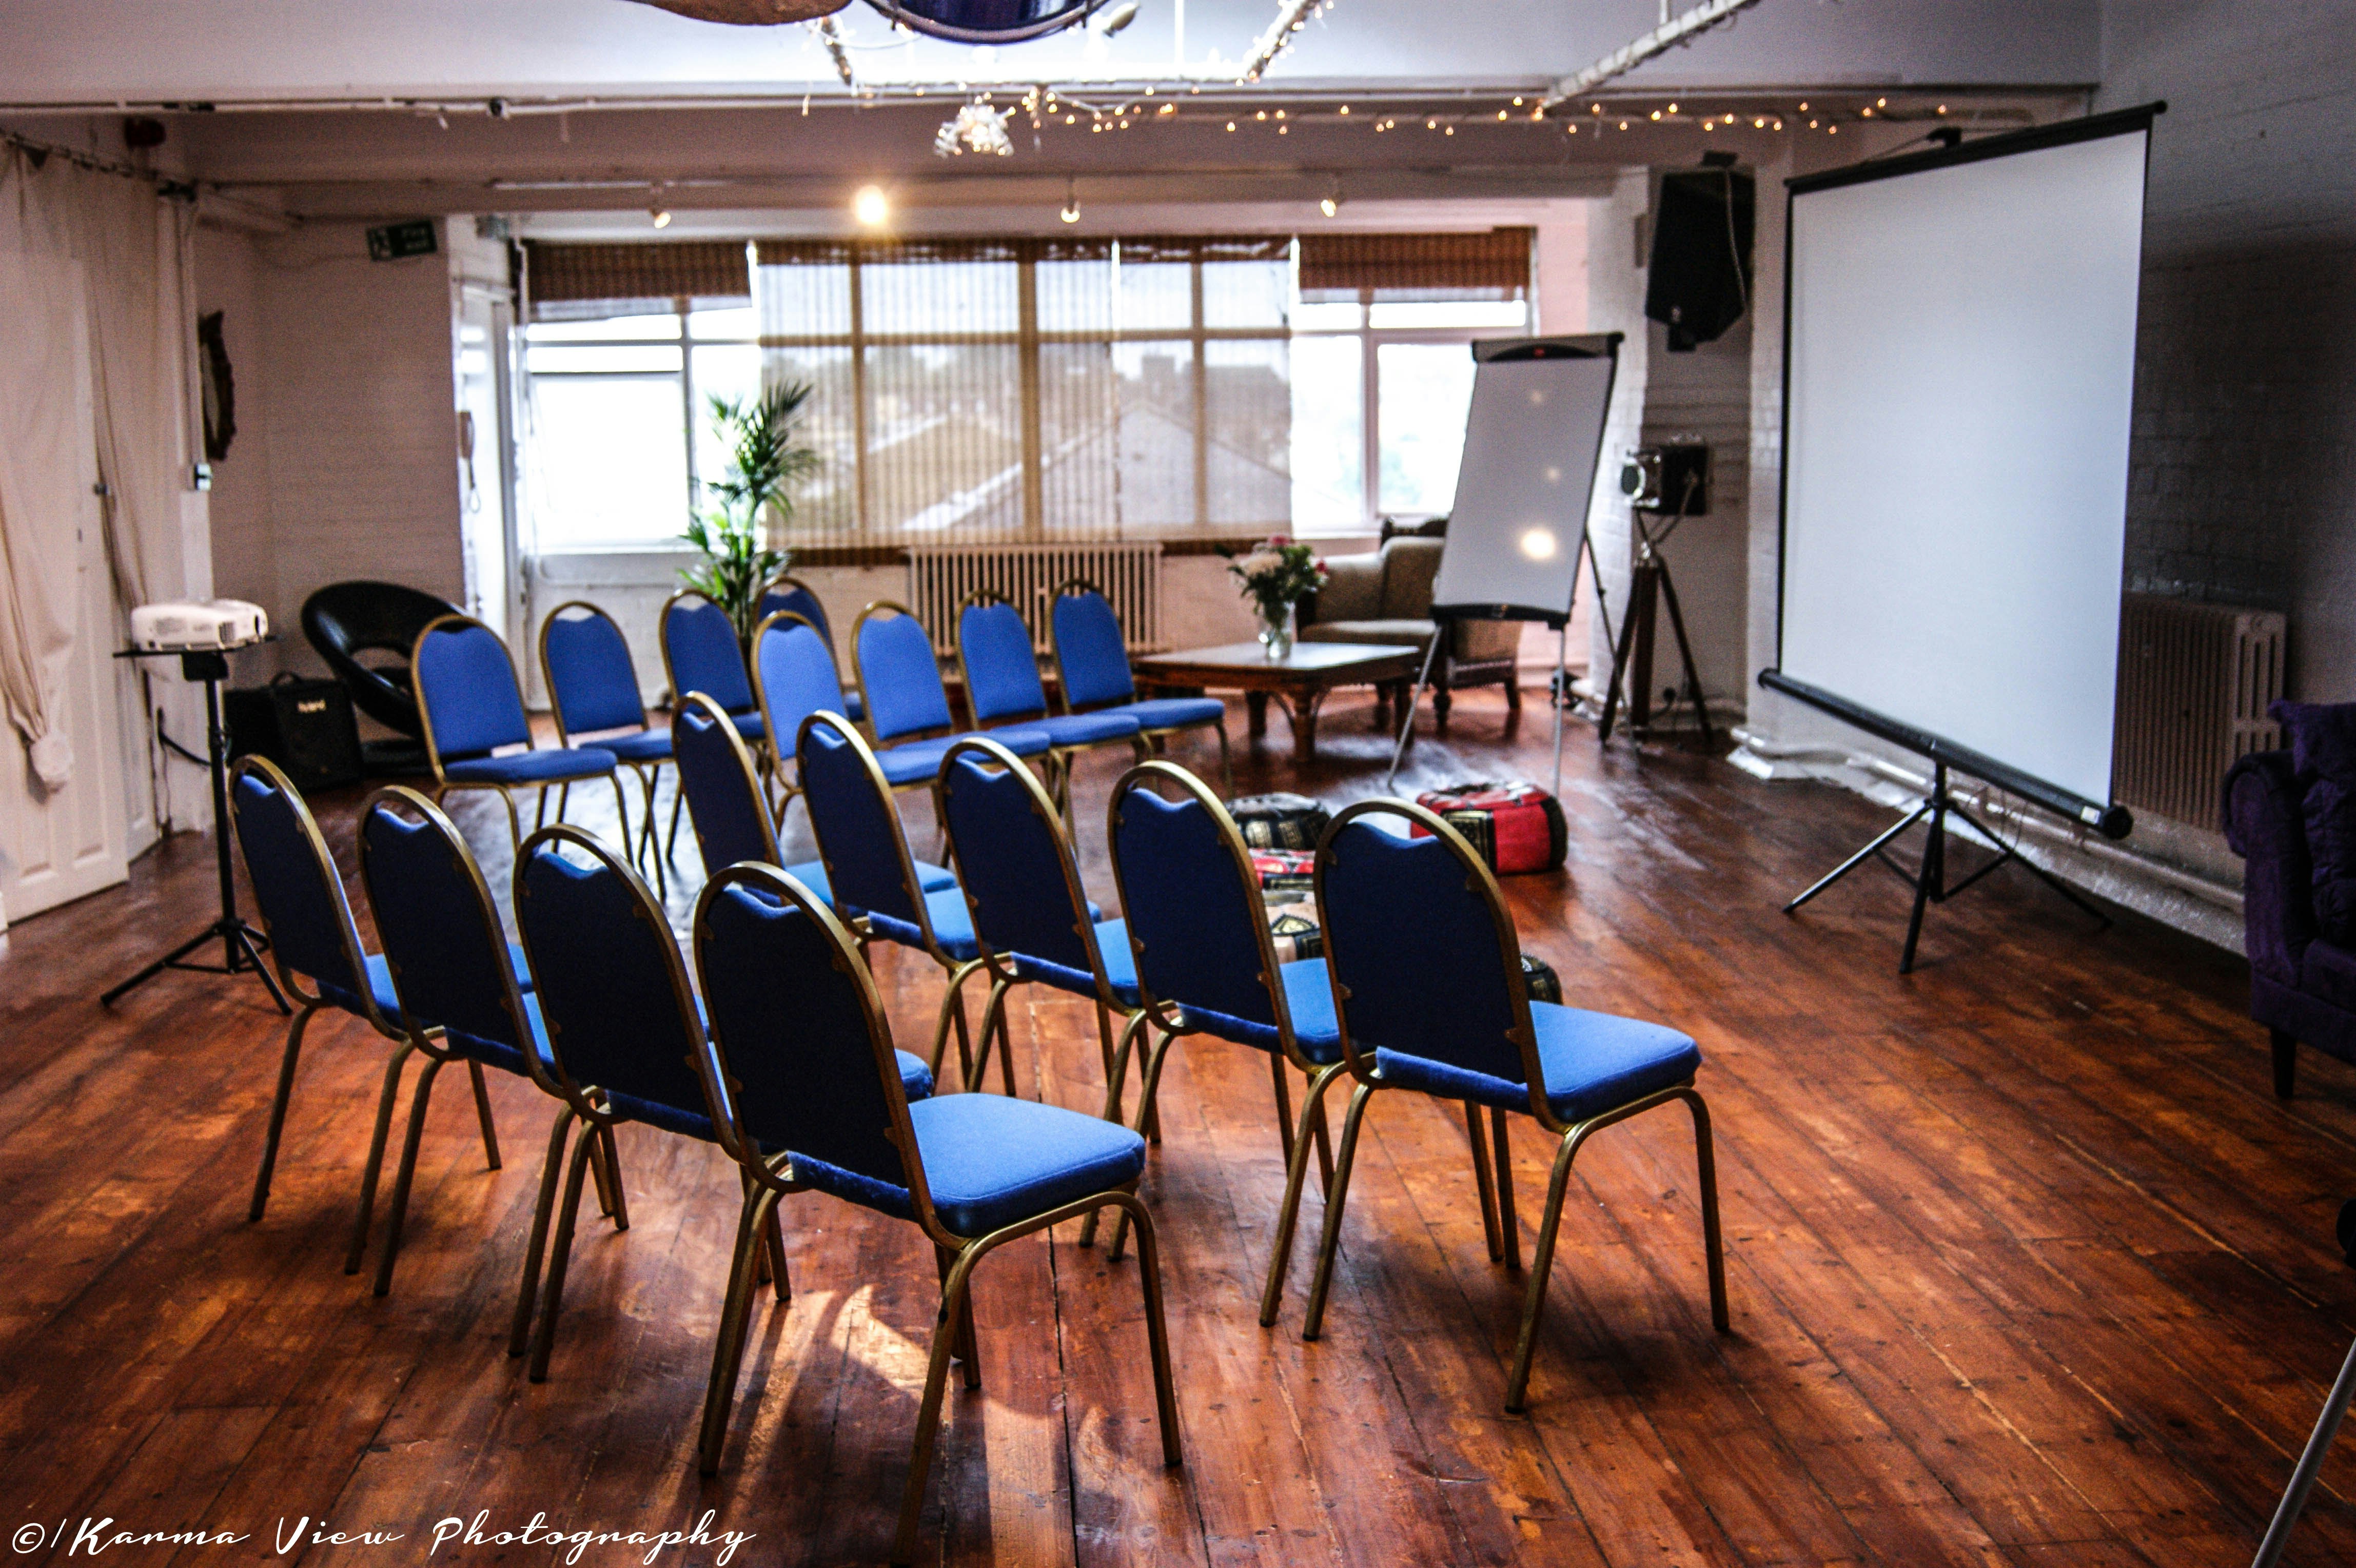 Corporate Days Out Venues in London - 4th Floor Studios